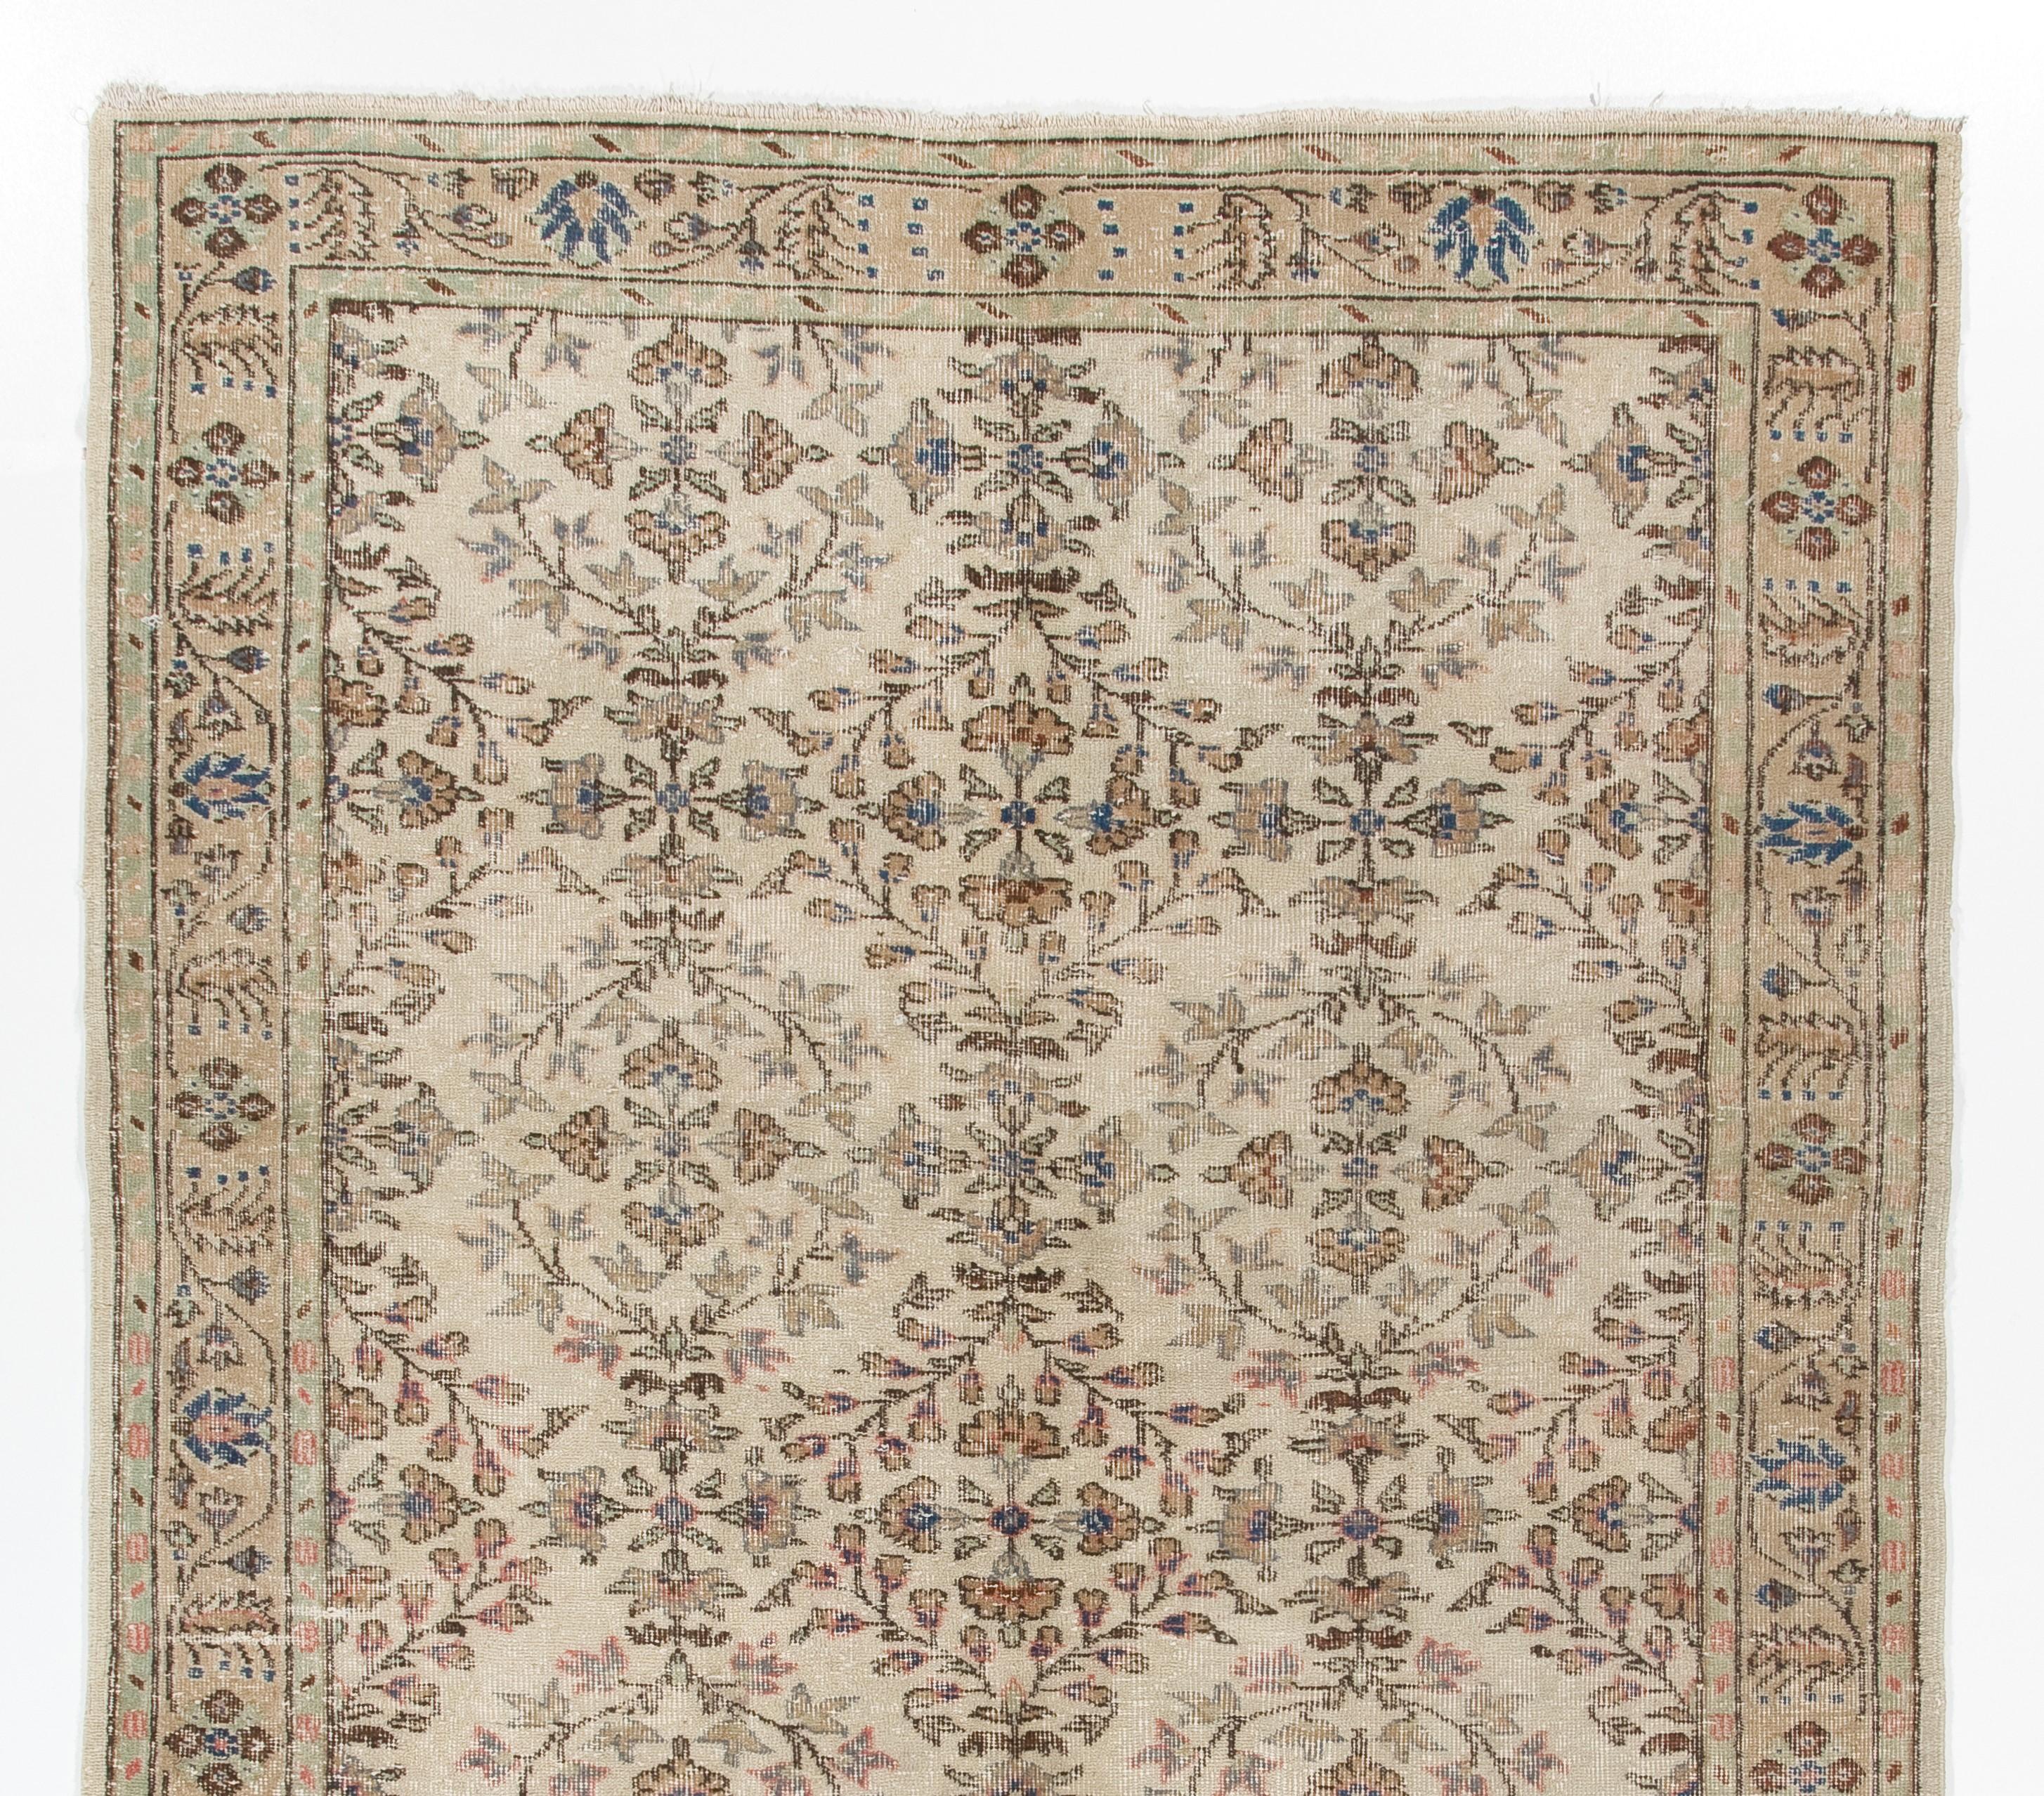 This vintage hand knotted Turkish Oushak area rug was made in the 1960s. It has low wool pile on cotton foundation. It is sturdy, in good condition and very clean. It features elegant floral heads in quatrefoil form in gently swirling lattices of